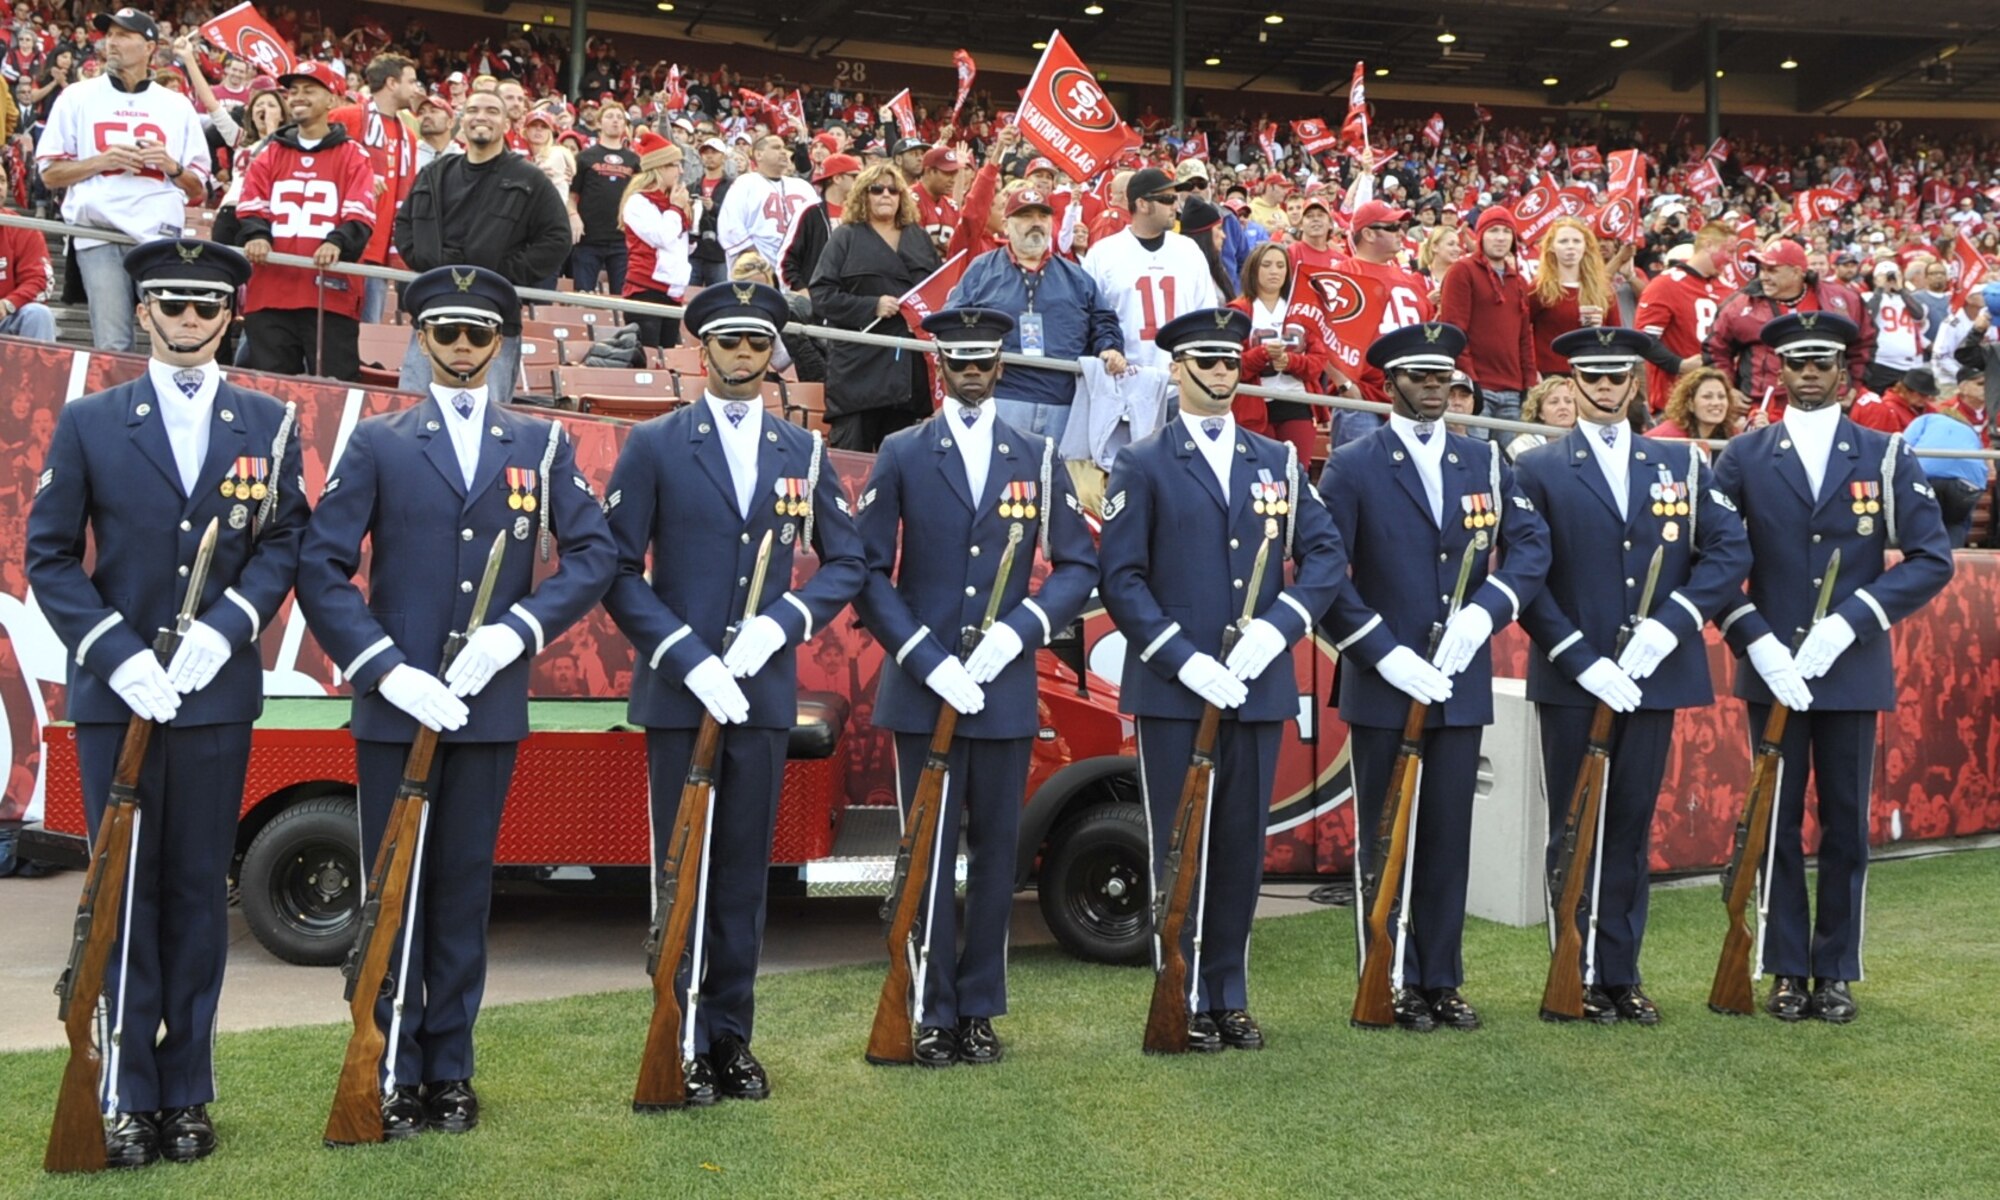 U.S. Air Force Honor Guard Drill Team members stand on the field at the Detroit Lions vs. San Francisco 49ers NFL football game at Candlestick Park in San Francisco, Calif., Sept. 16, 2012.  The Drill Team performed in front of more than 500 people during a pre-game drill and stood on the field during the National Anthem in front of a sold-out crowd.  (U.S. Air Force photo by Senior Master Sgt. Adam M. Stump)